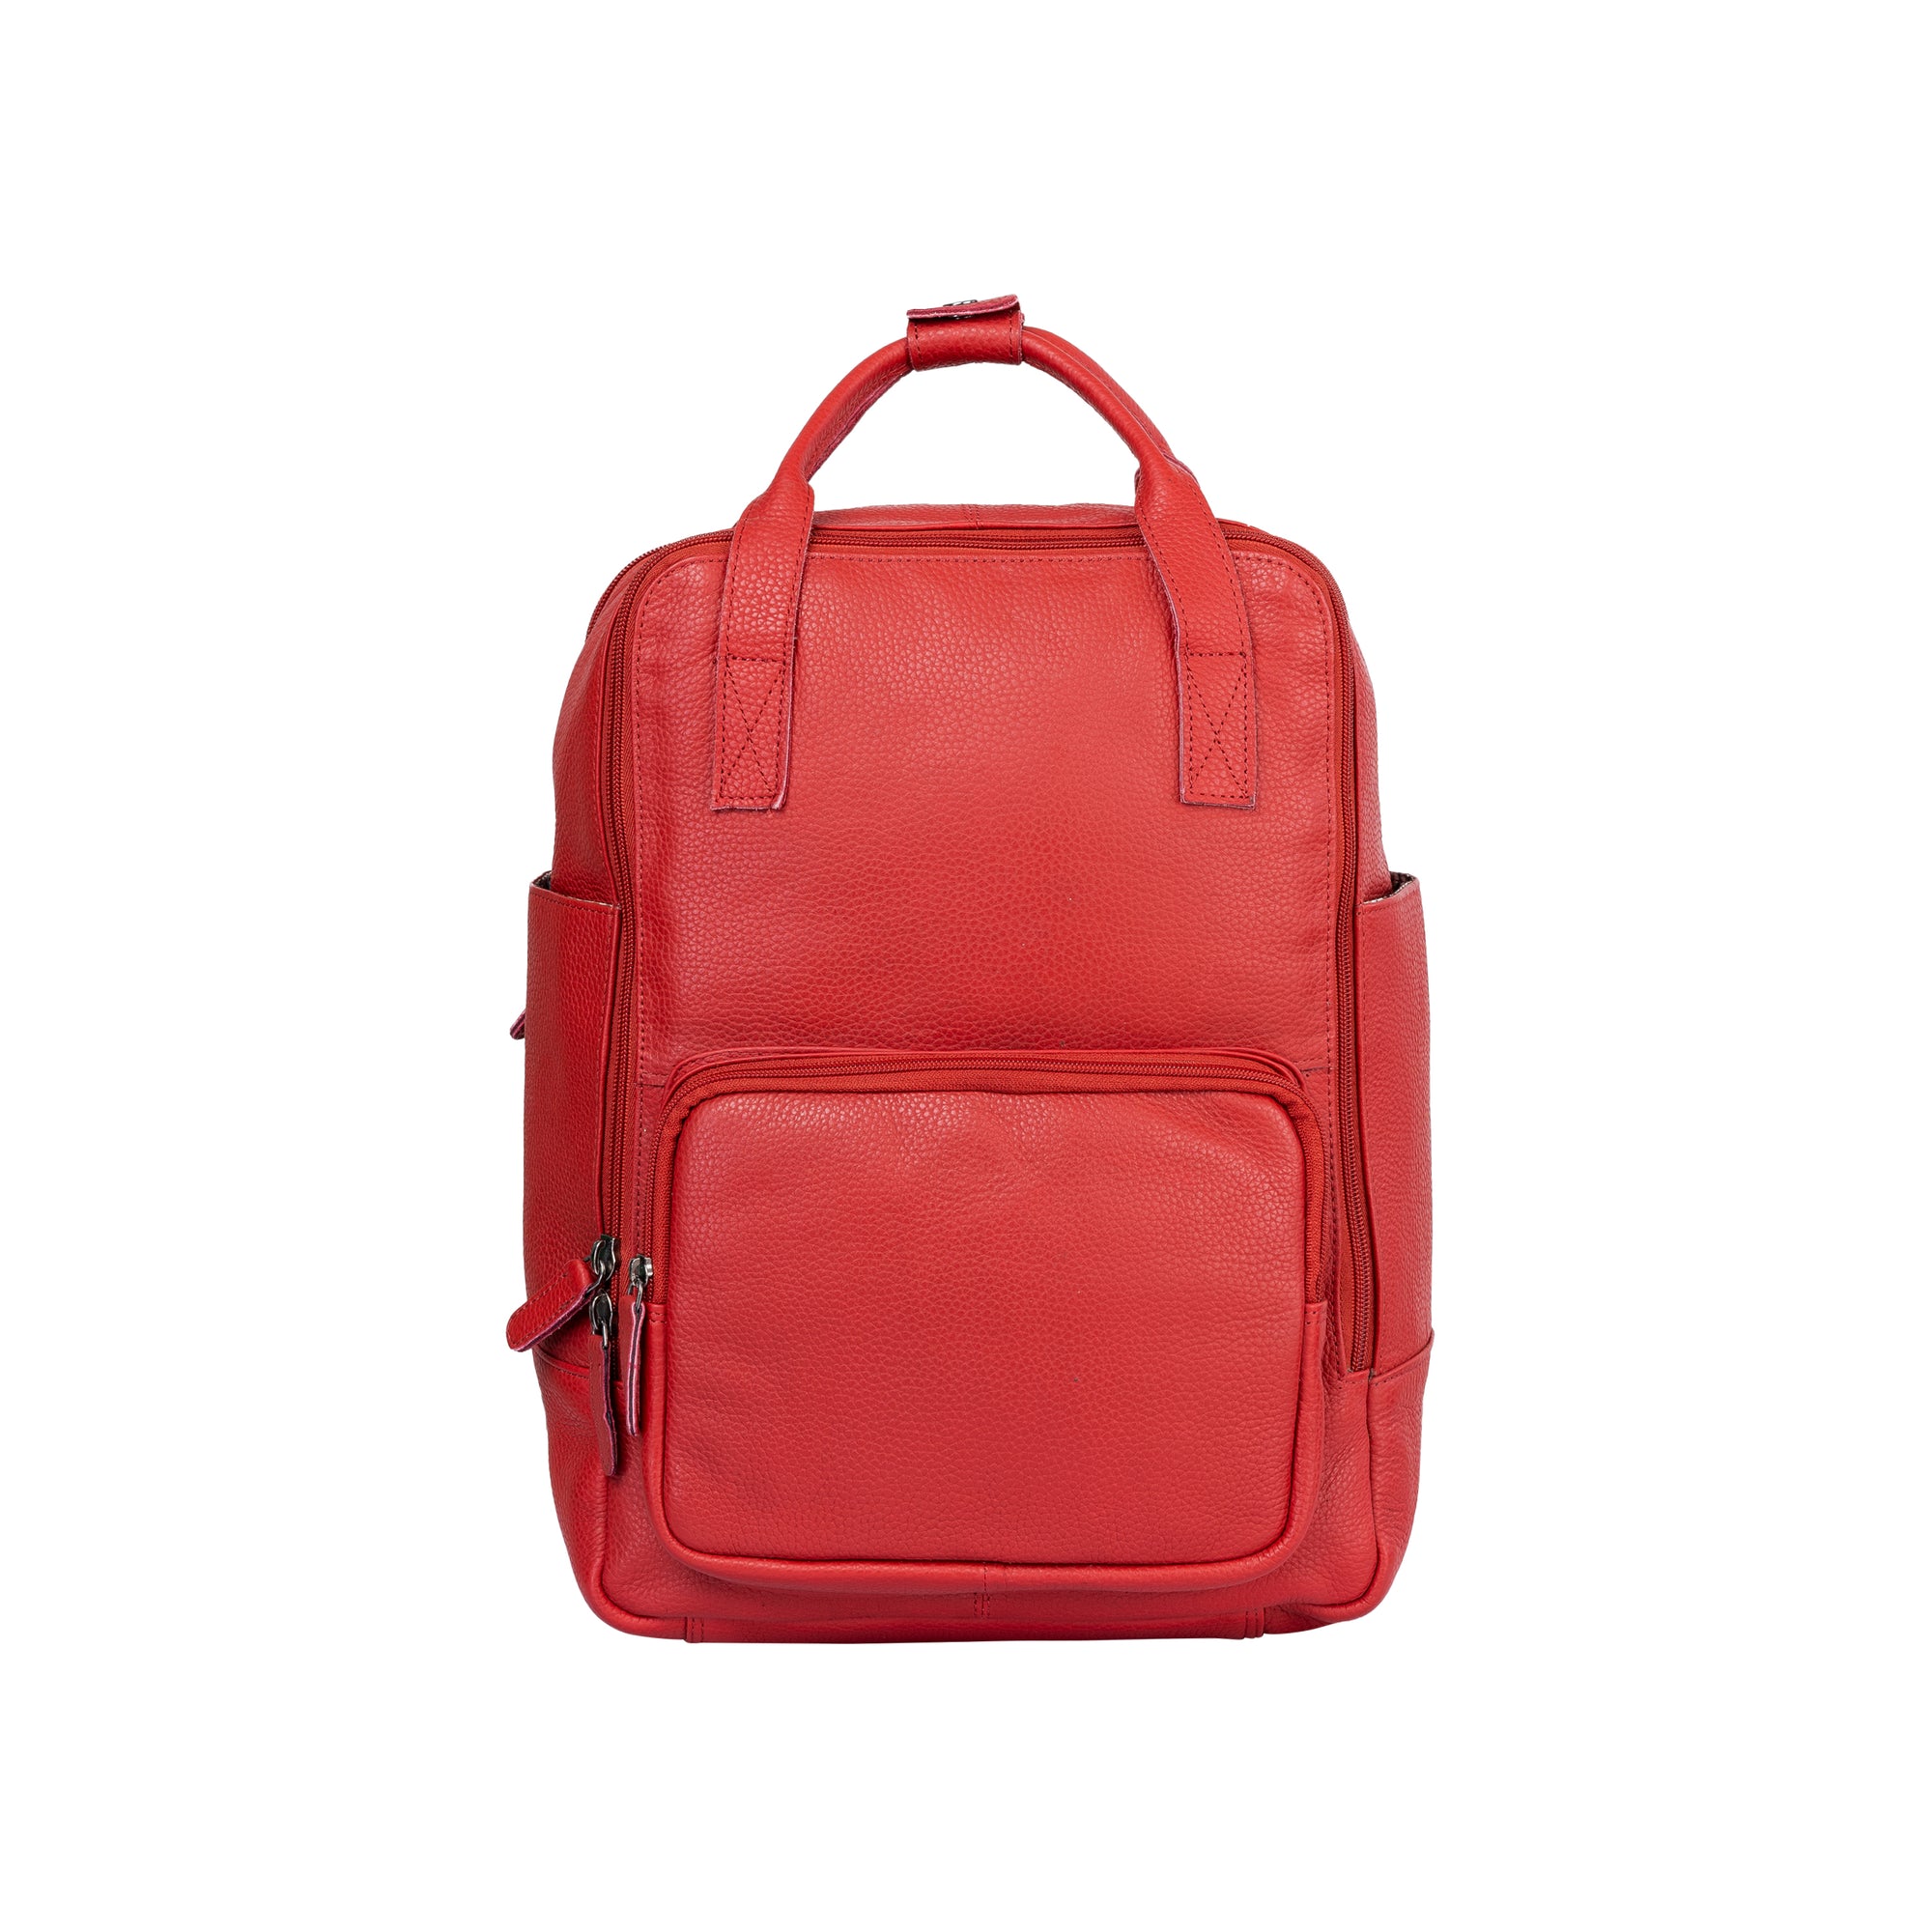 Leather Backpack Mackay - Red - Leather Greenwood Bag | The Greenwood Leather Online Shop Australia